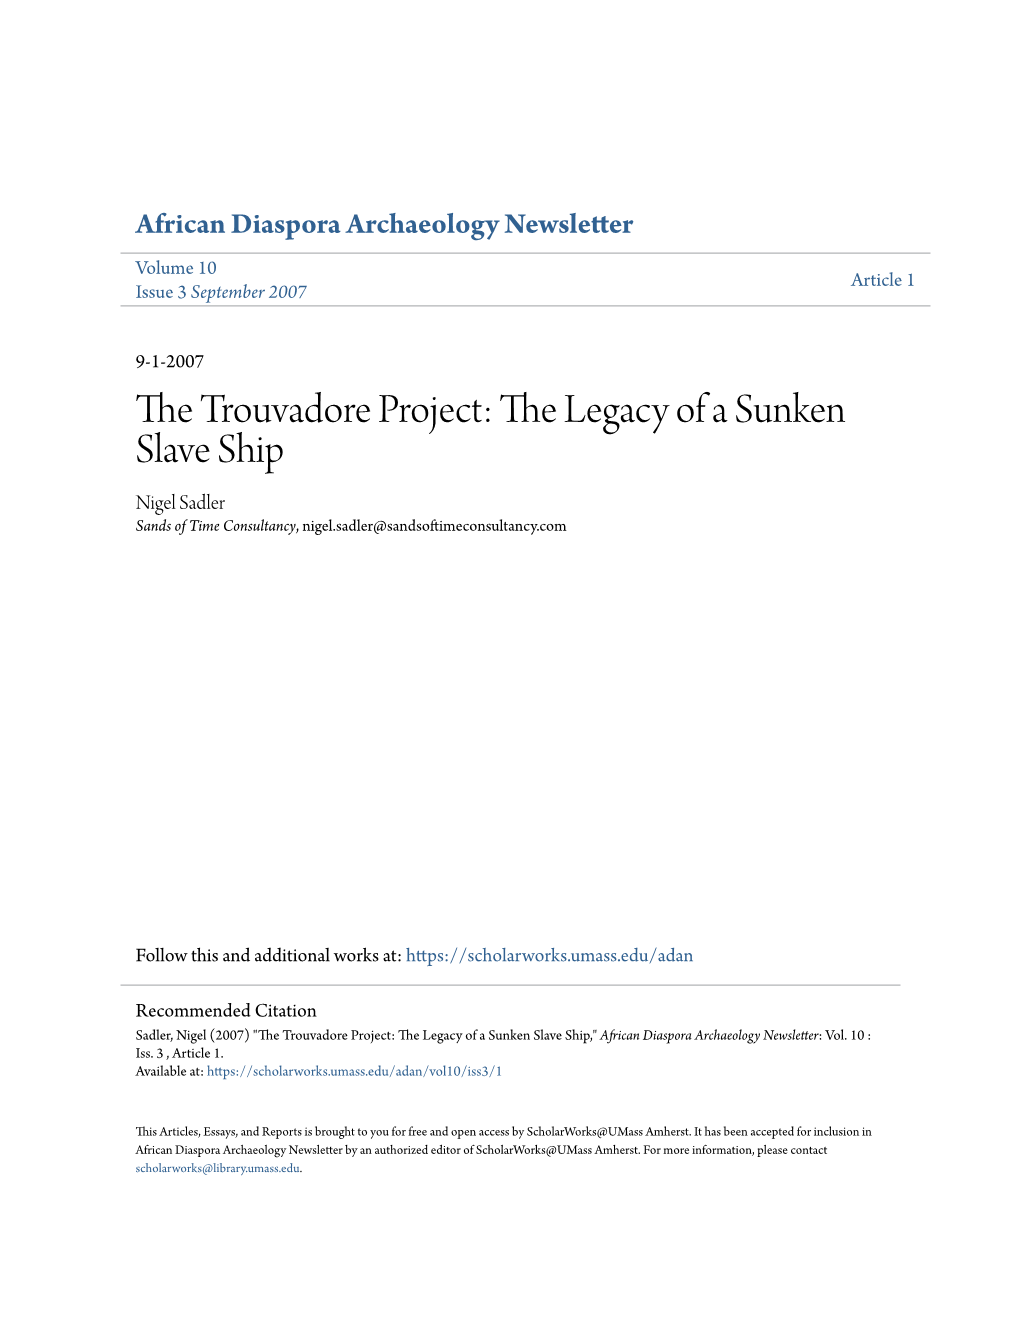 The Trouvadore Project: the Legacy of a Sunken Slave Ship